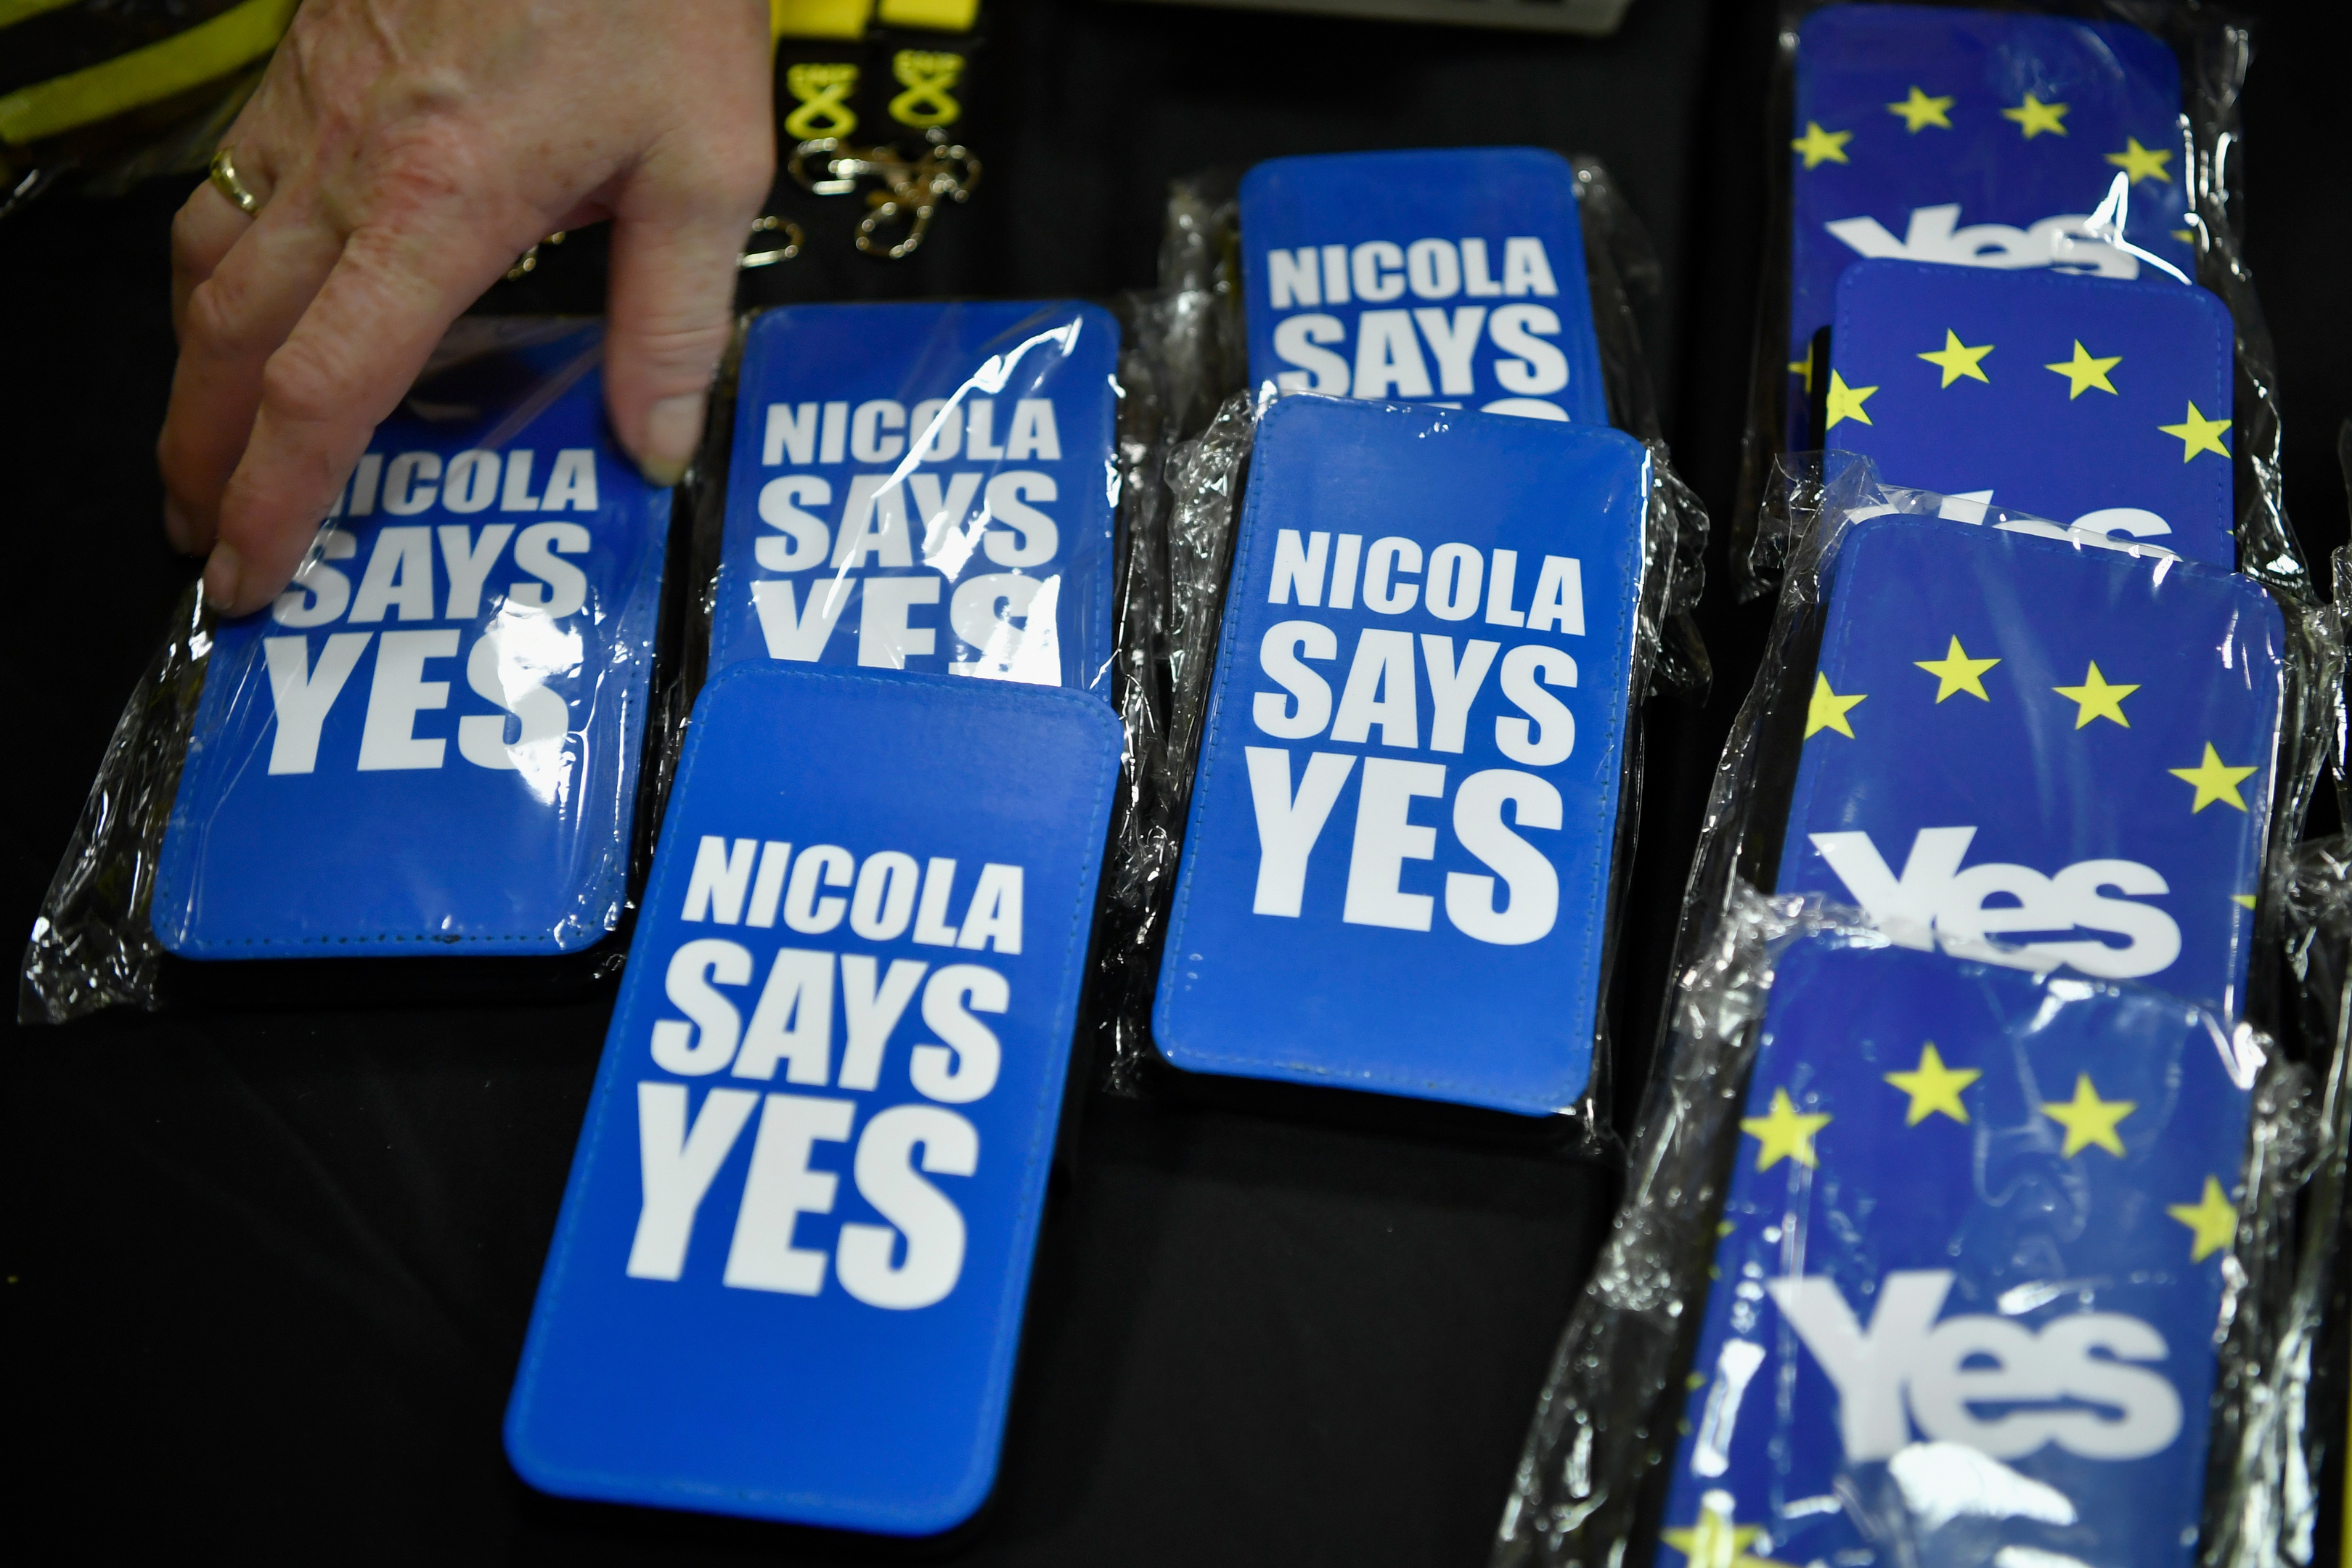 Merchandise on sale at the SNP conference.